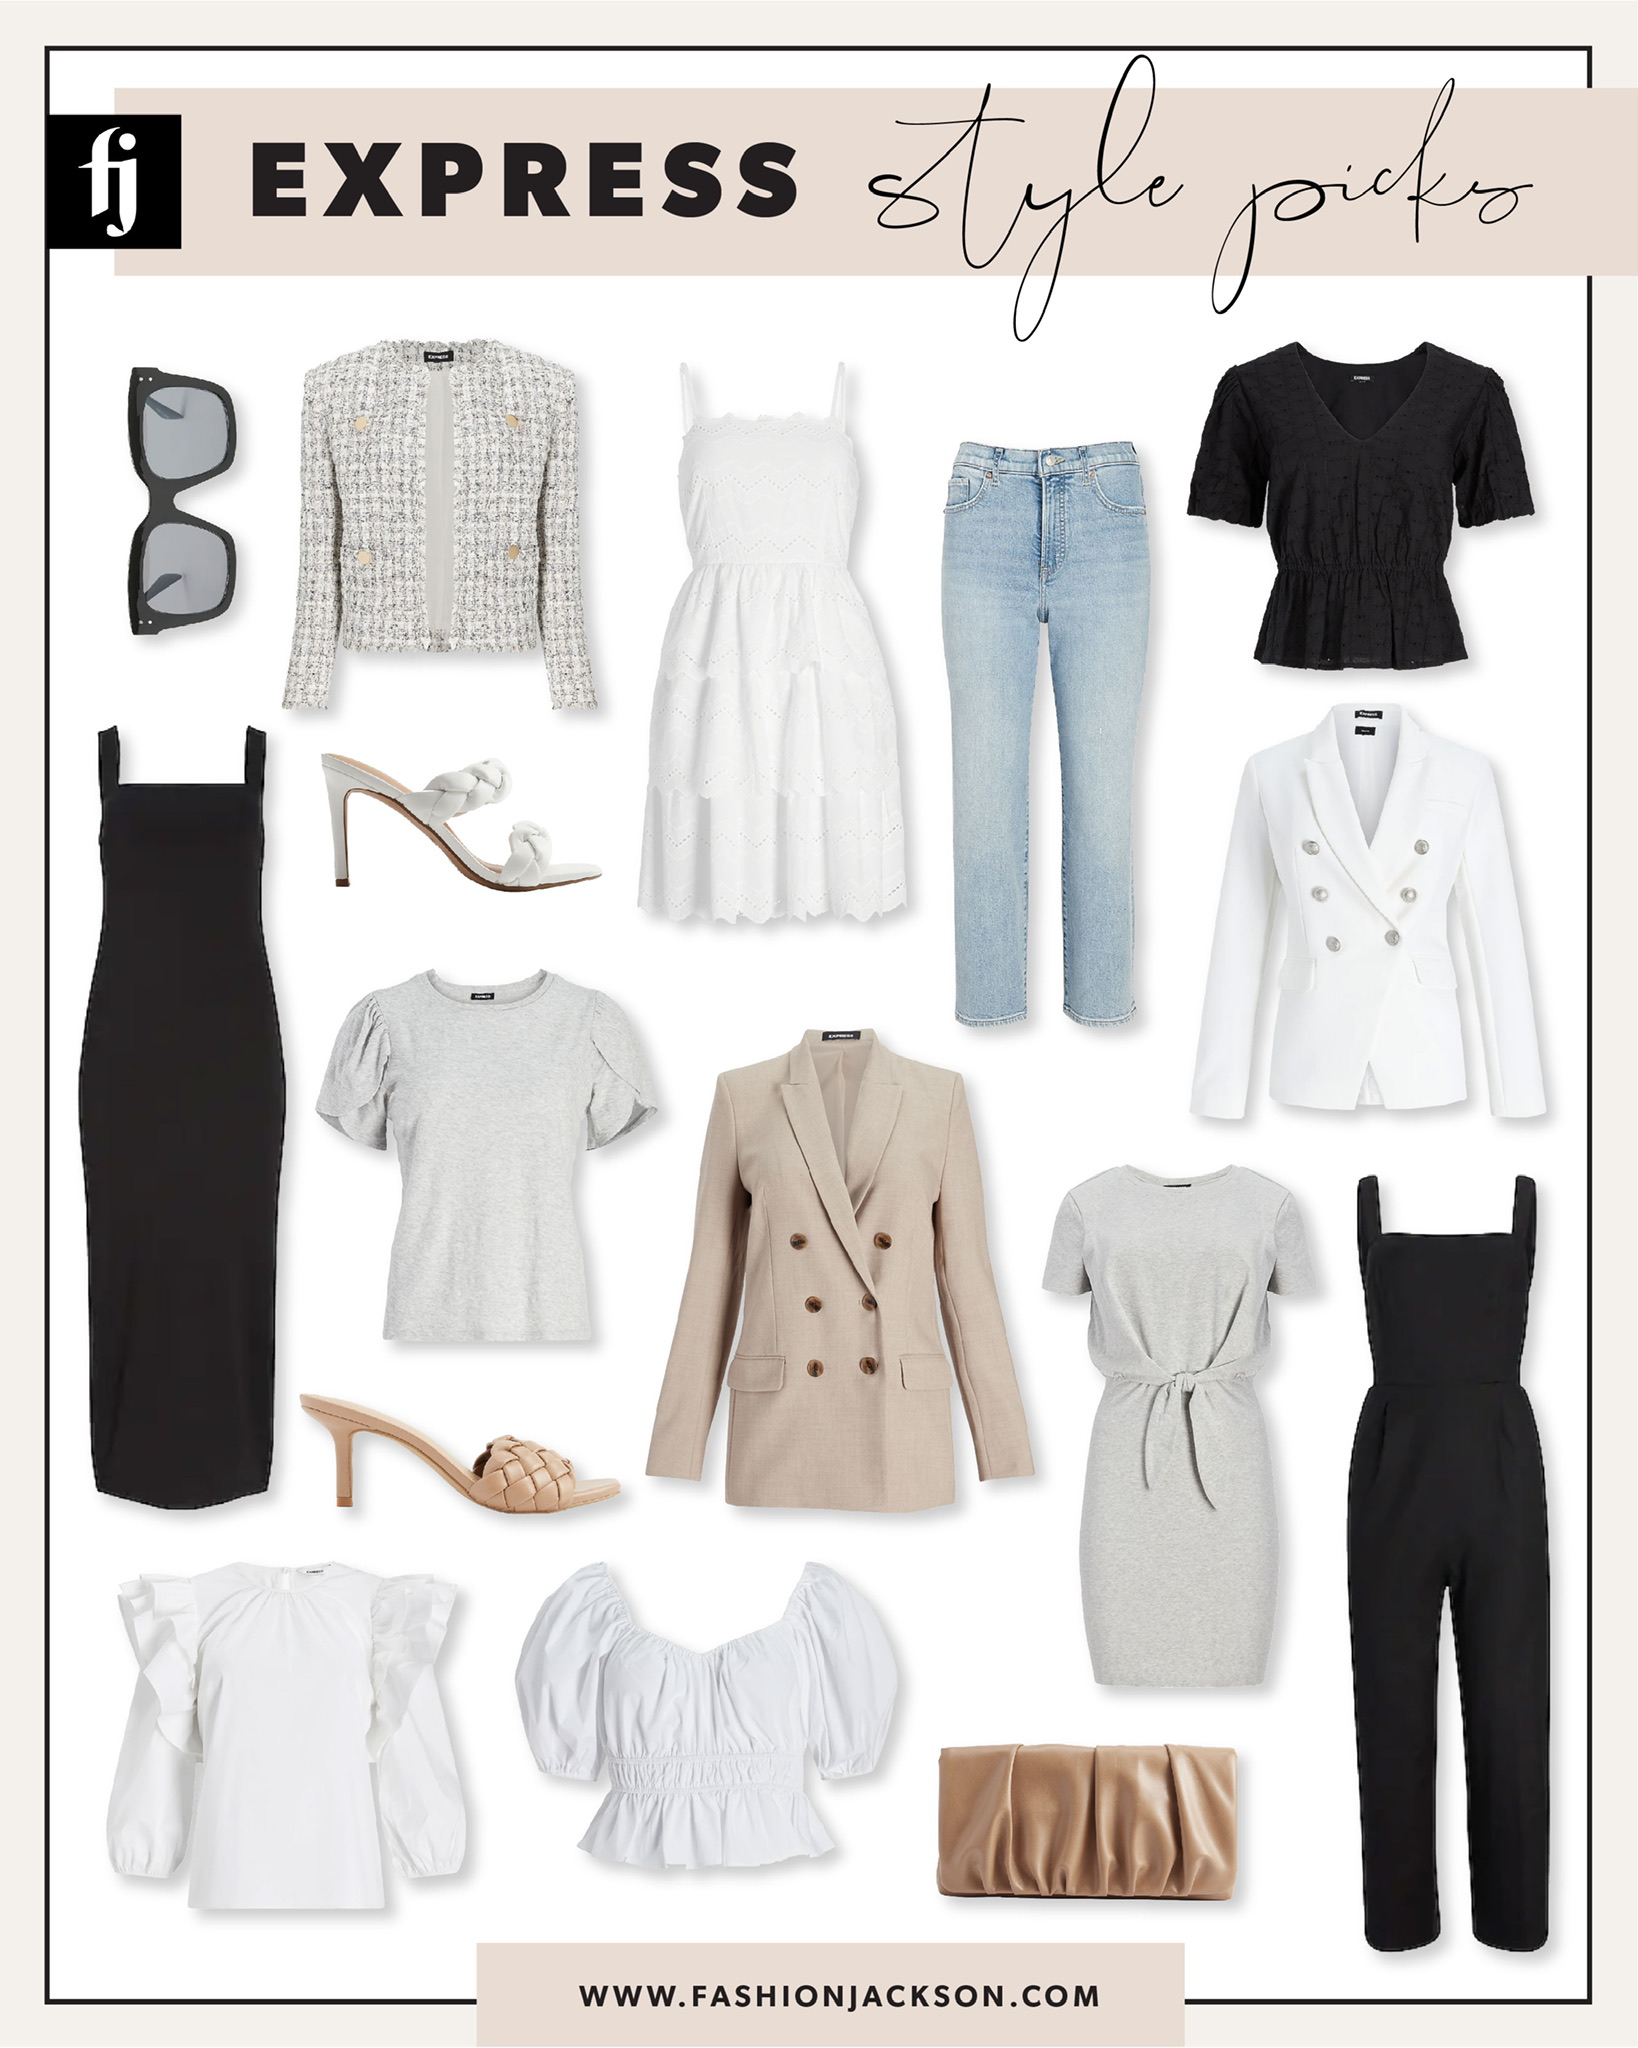 Express Spring Styles